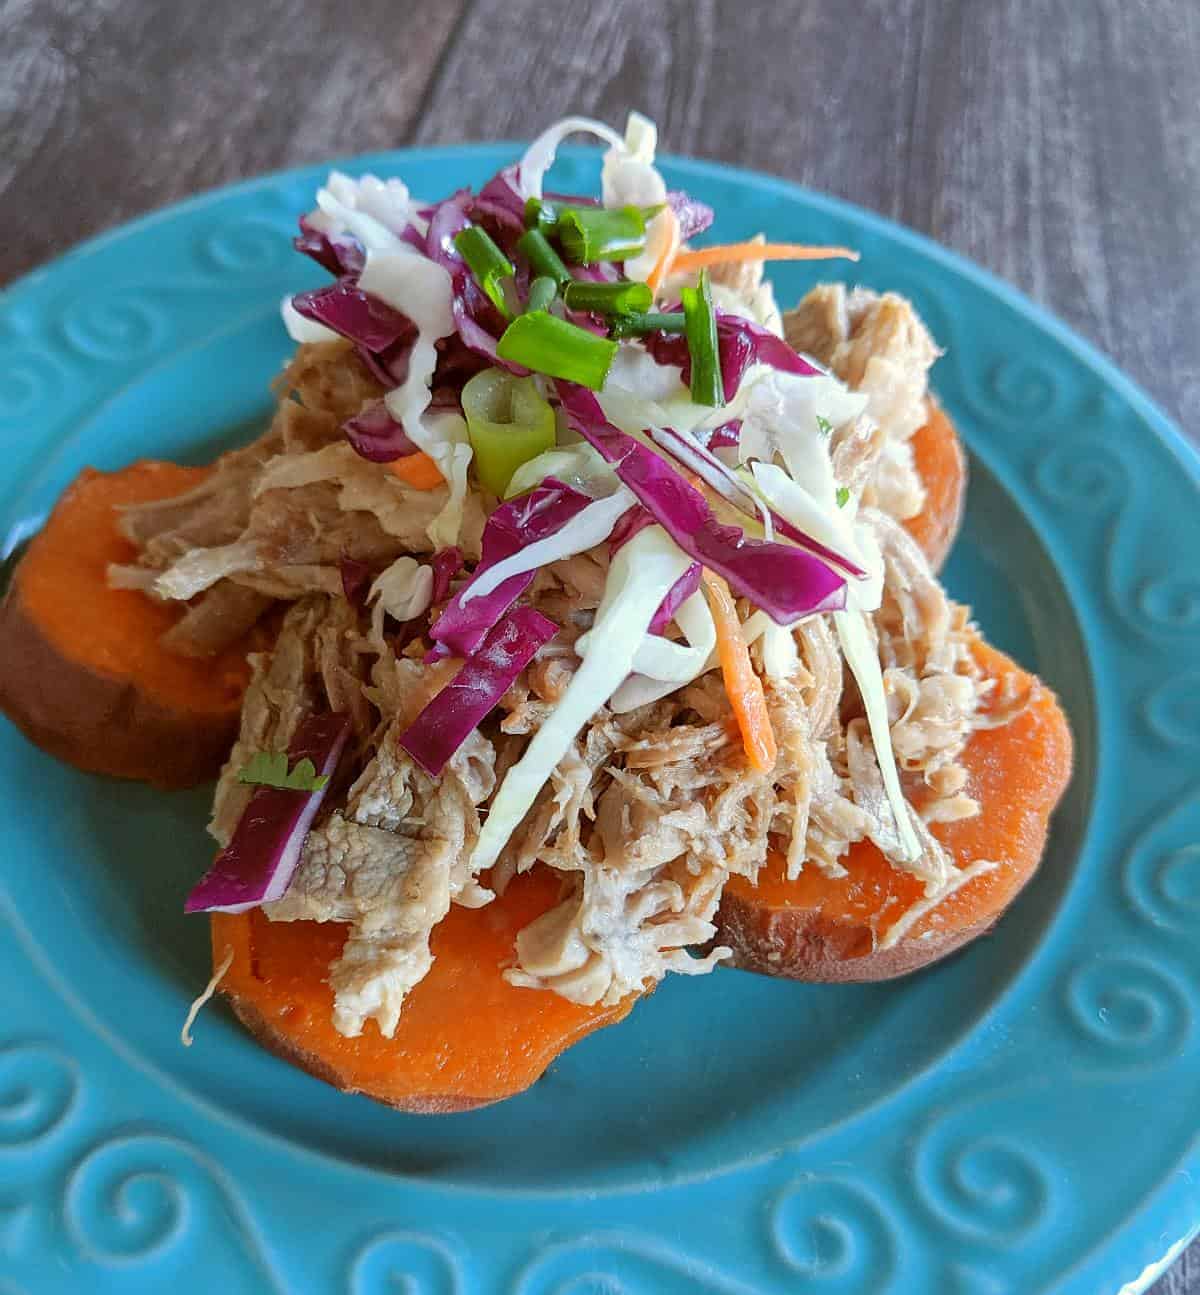 Pulled pork on sweet potato slices topped with shredded cabbage.